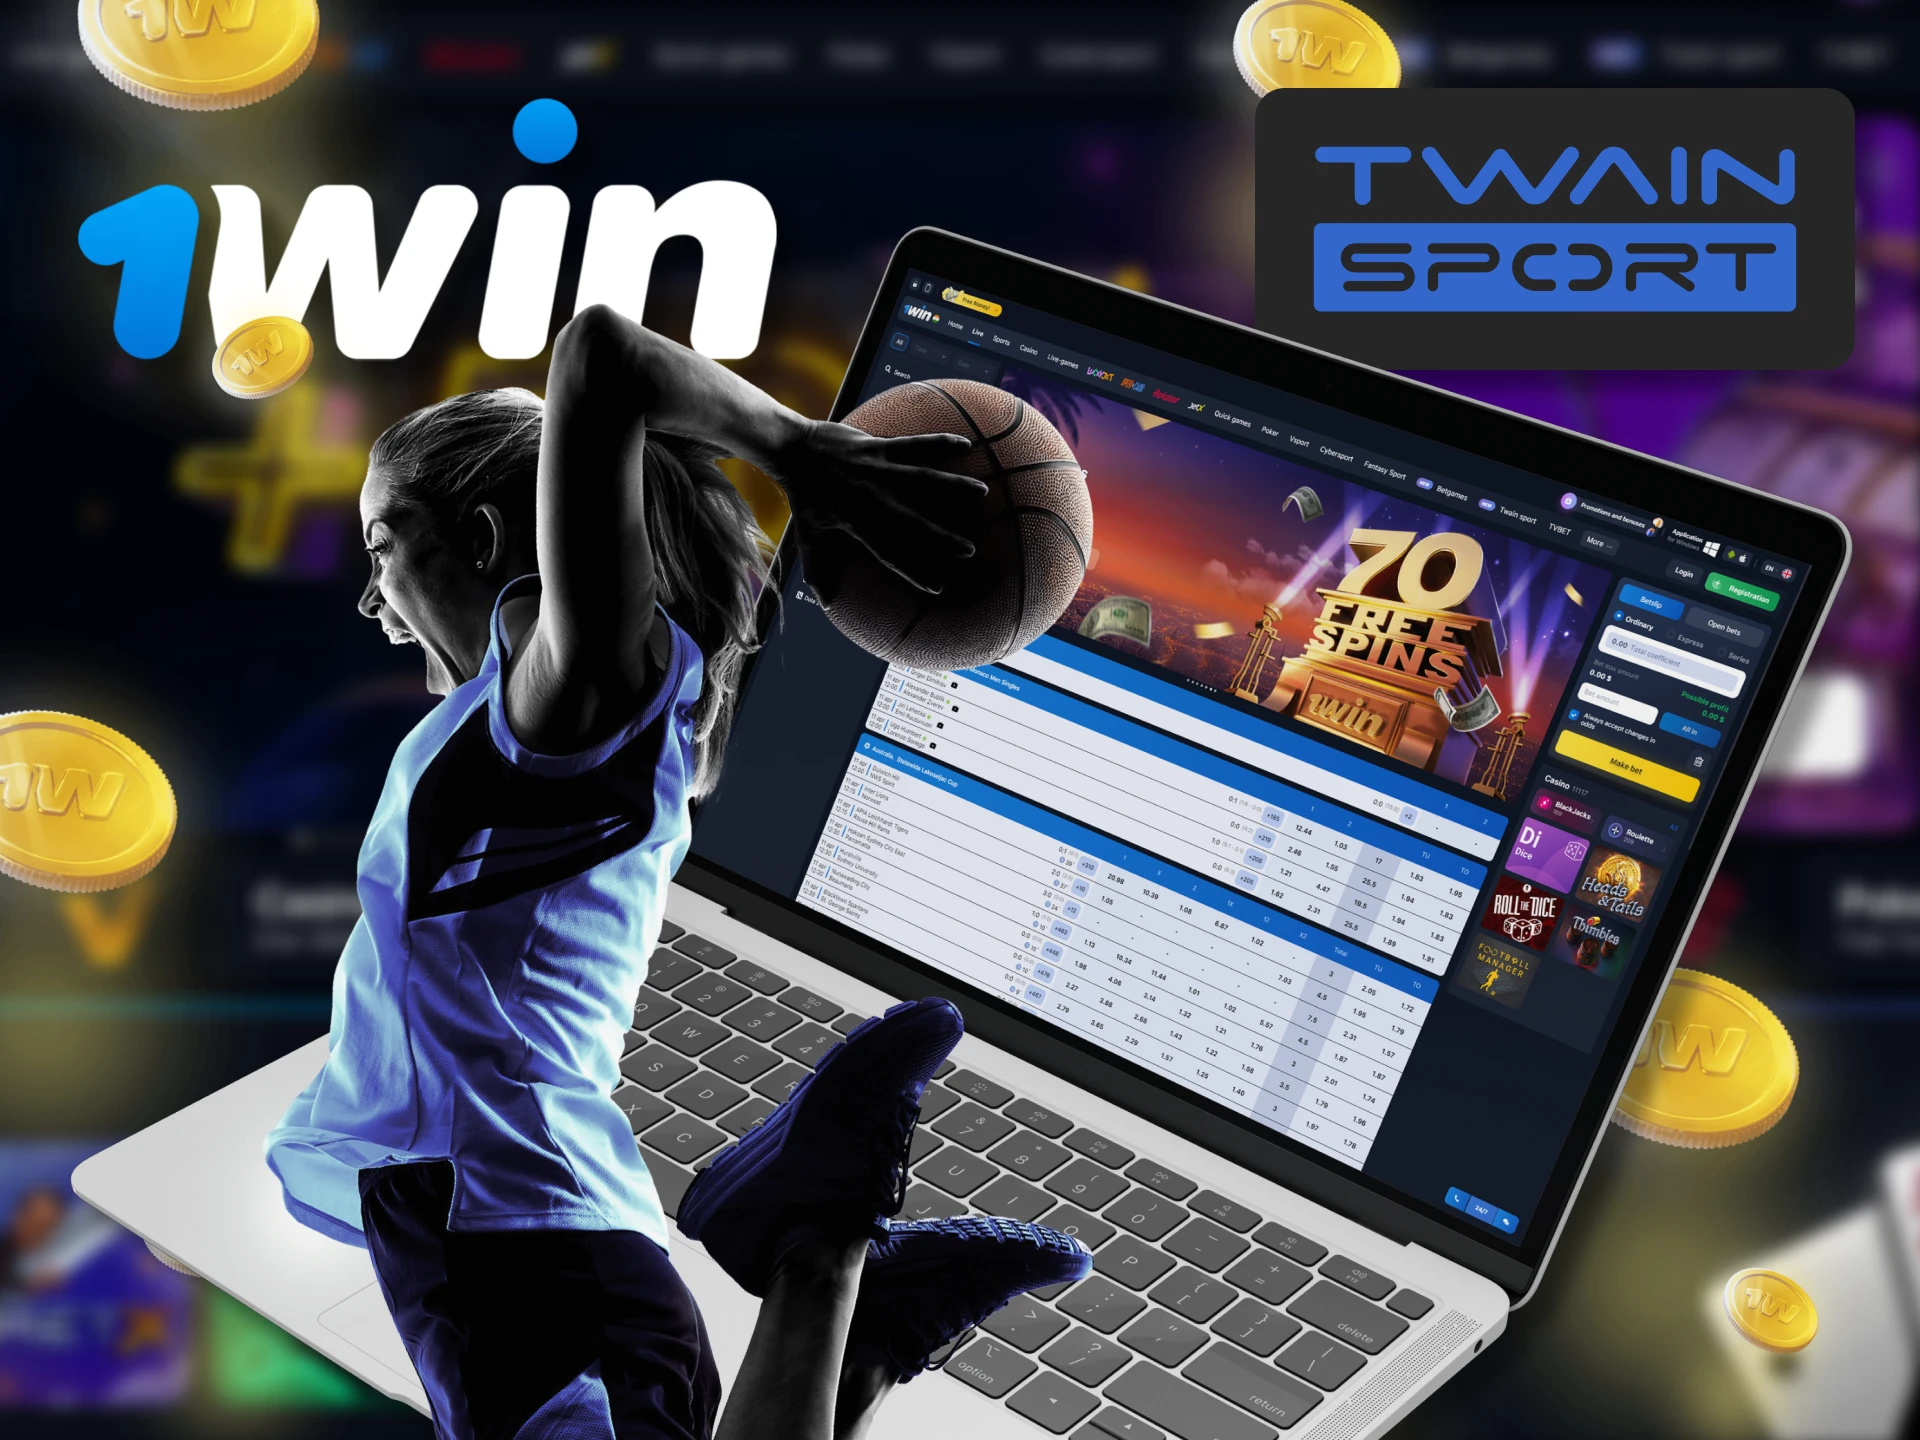 Sign up or log in to 1Win to place bets on Twain Sports.